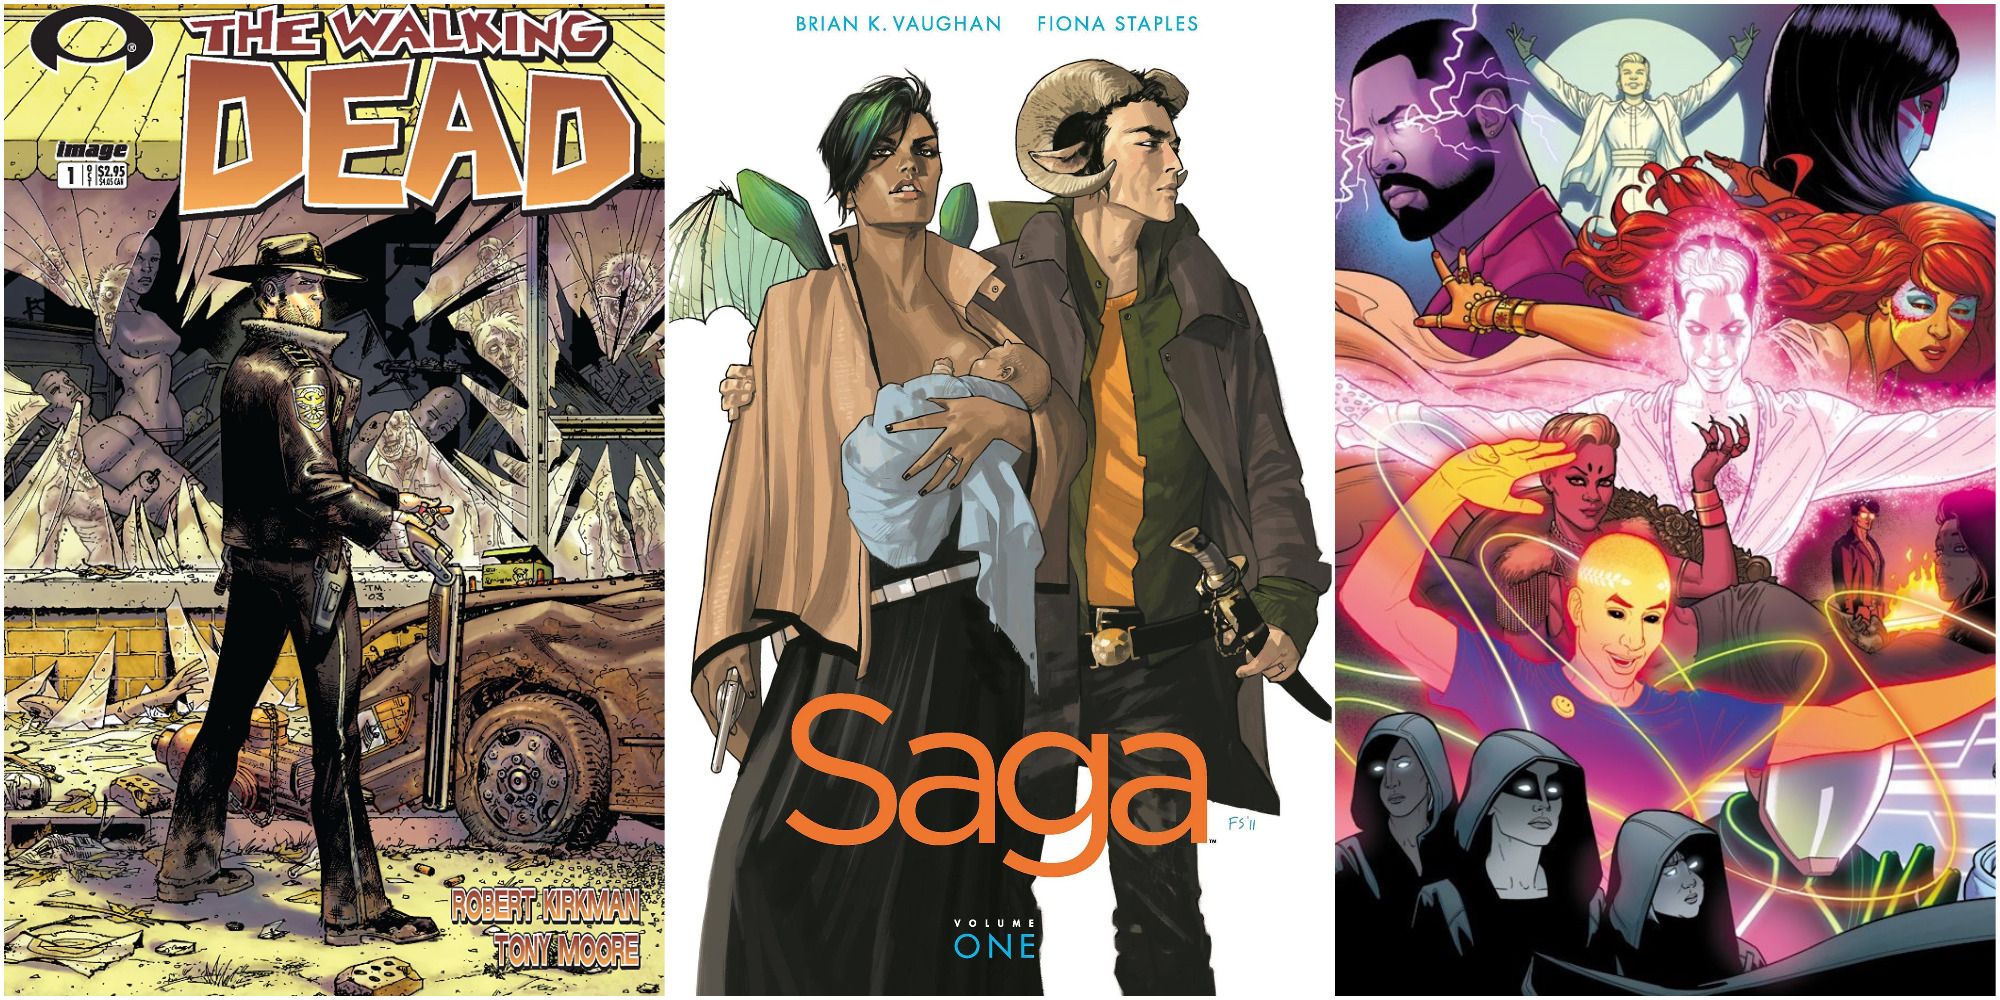 The Walking Dead, Saga, and The Wicked + The Divine